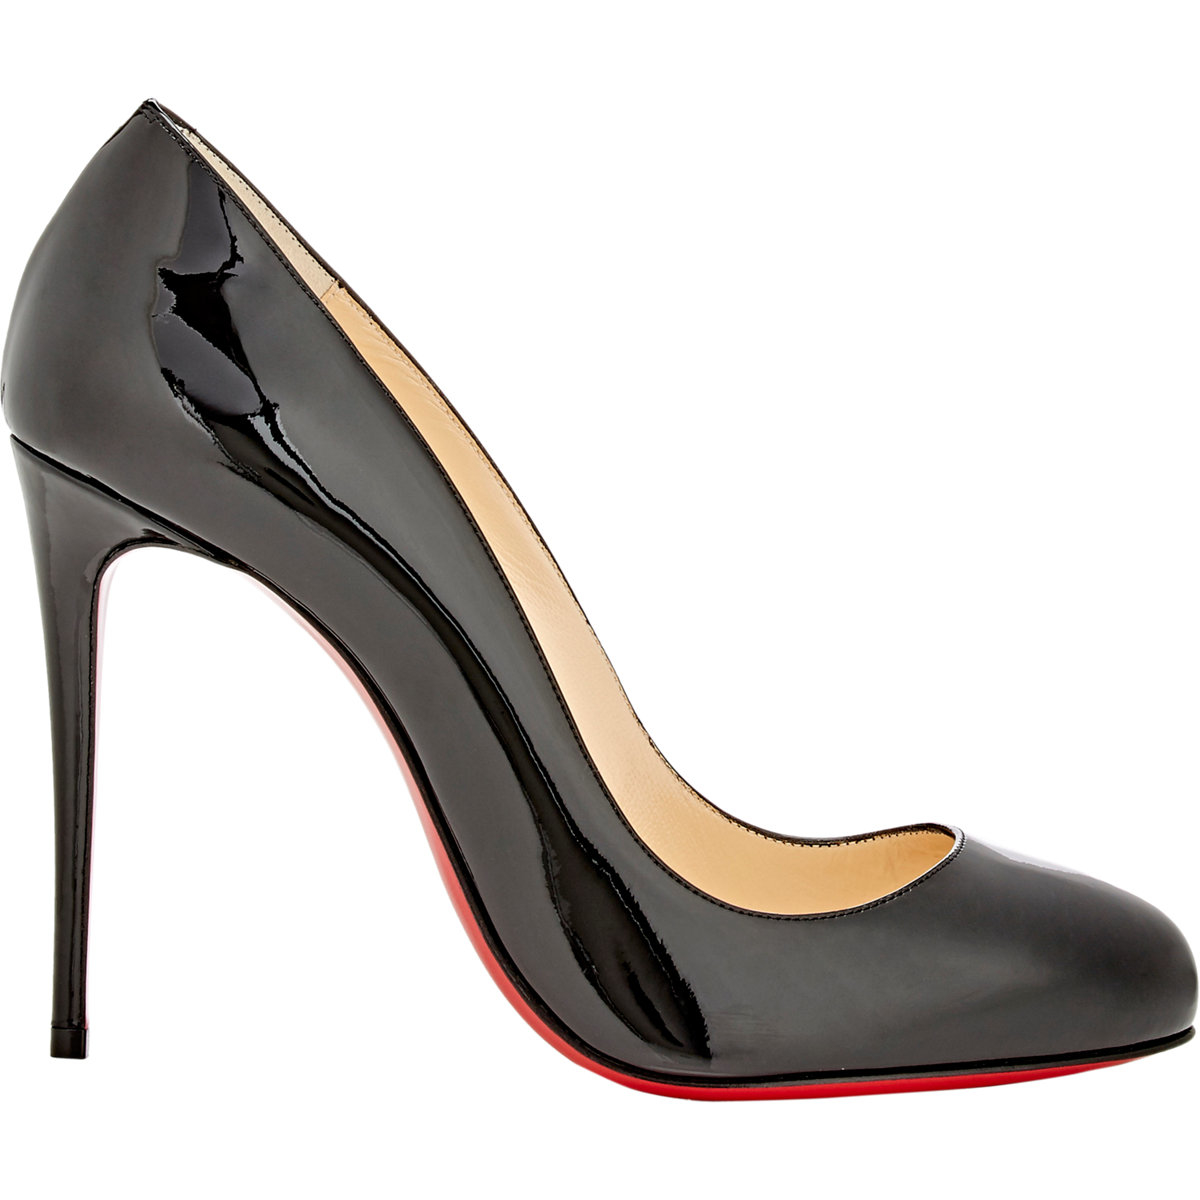 christian louboutin replica mens shoes - Christian louboutin Dorissima Patent Leather Pumps in Black | Lyst